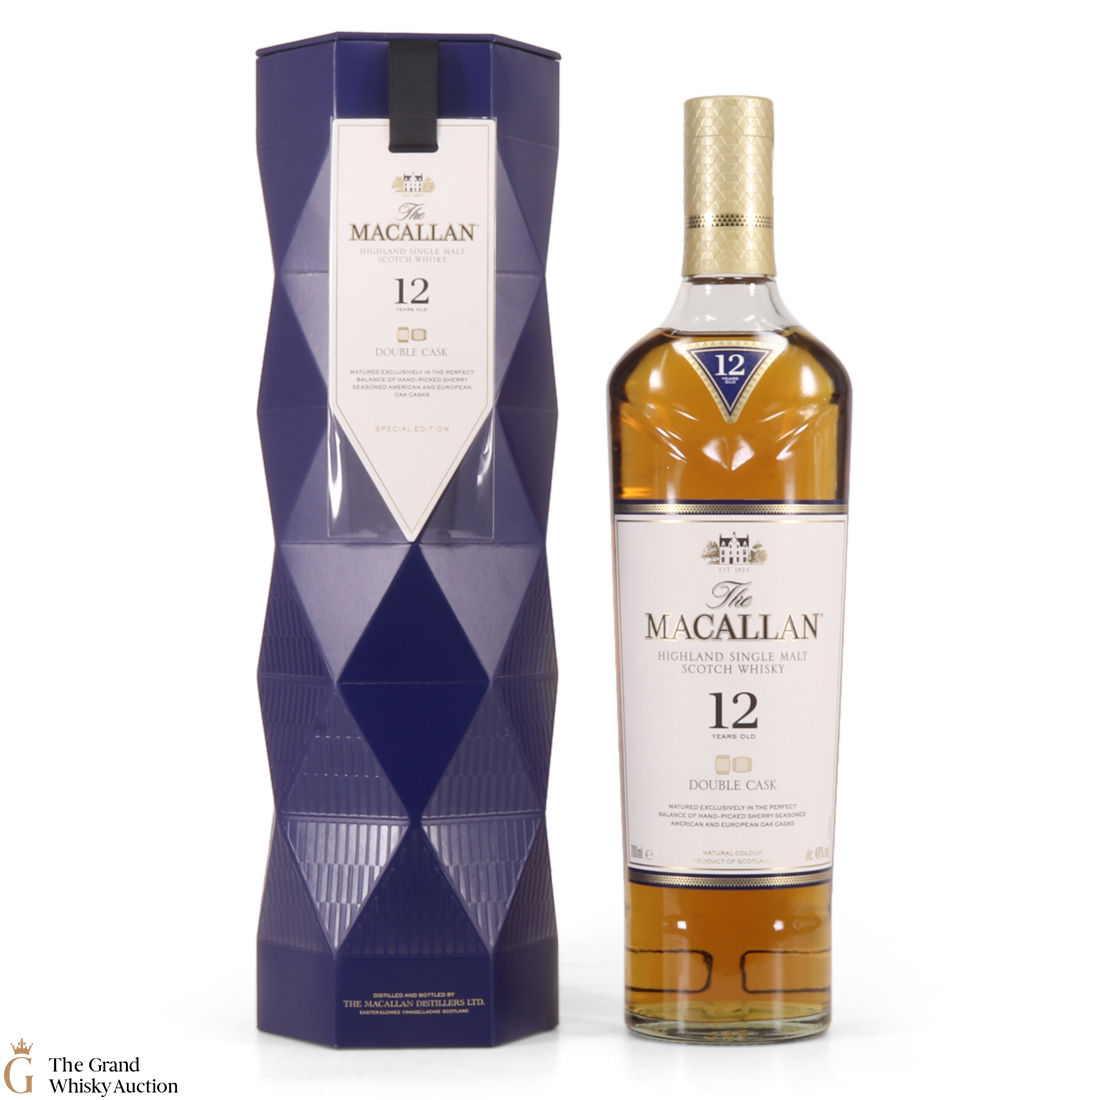 Macallan 12 Year Old Double Cask 2019 Special Edition Auction The Grand Whisky Auction